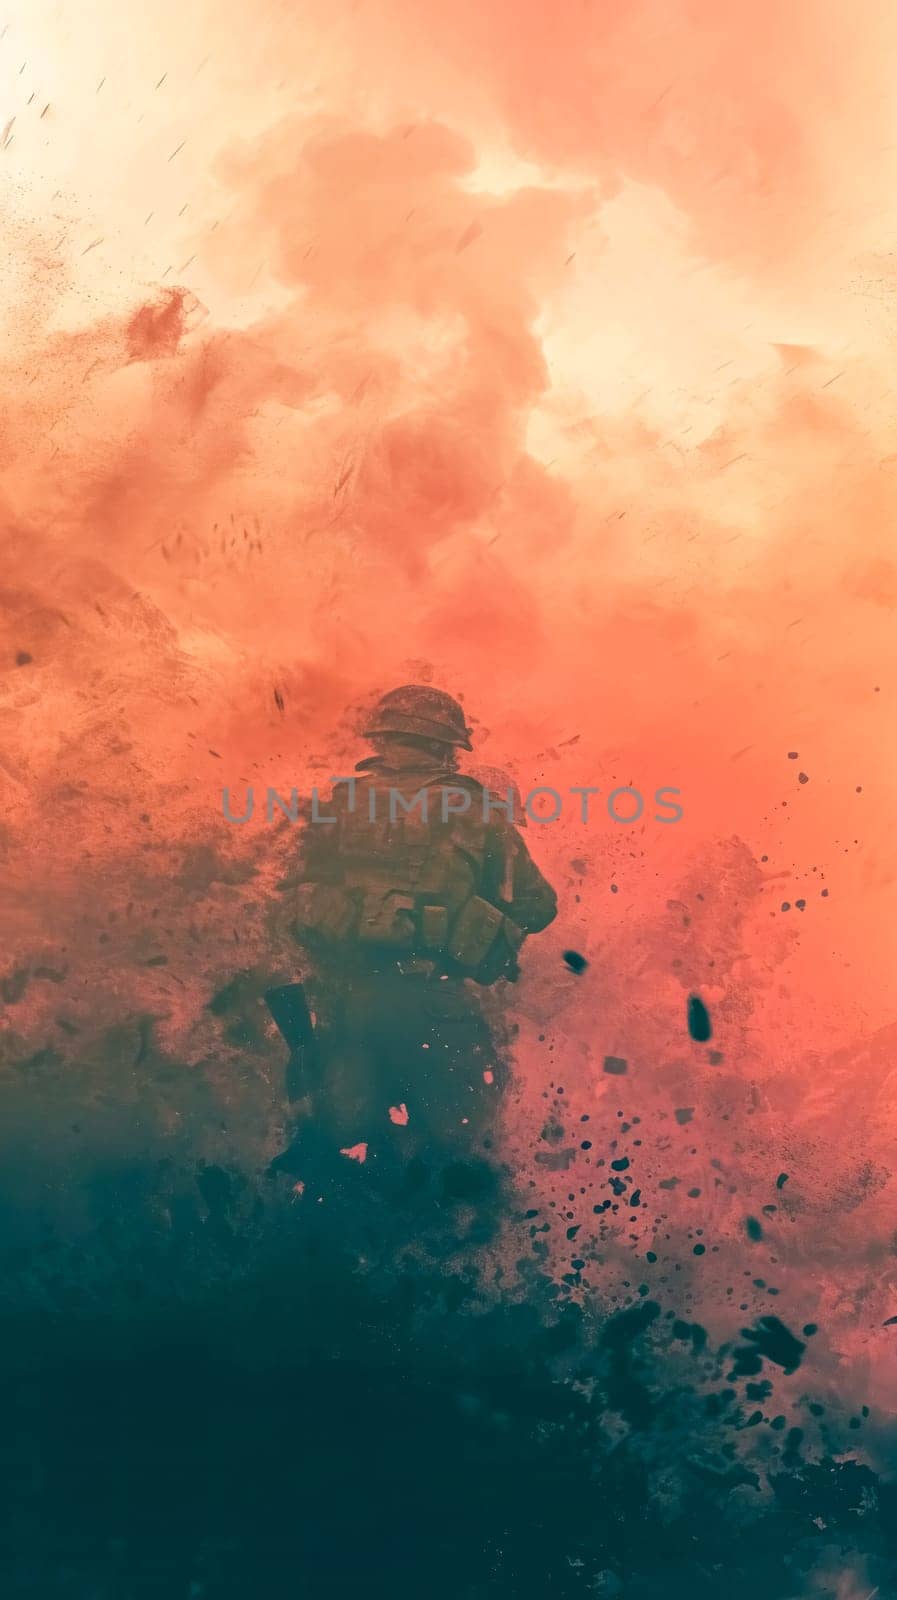 A lone soldier enveloped in a mist of dust and smoke, set against a vibrant backdrop of fiery orange to deep teal, suggesting a scene of intense conflict or aftermath. vertical